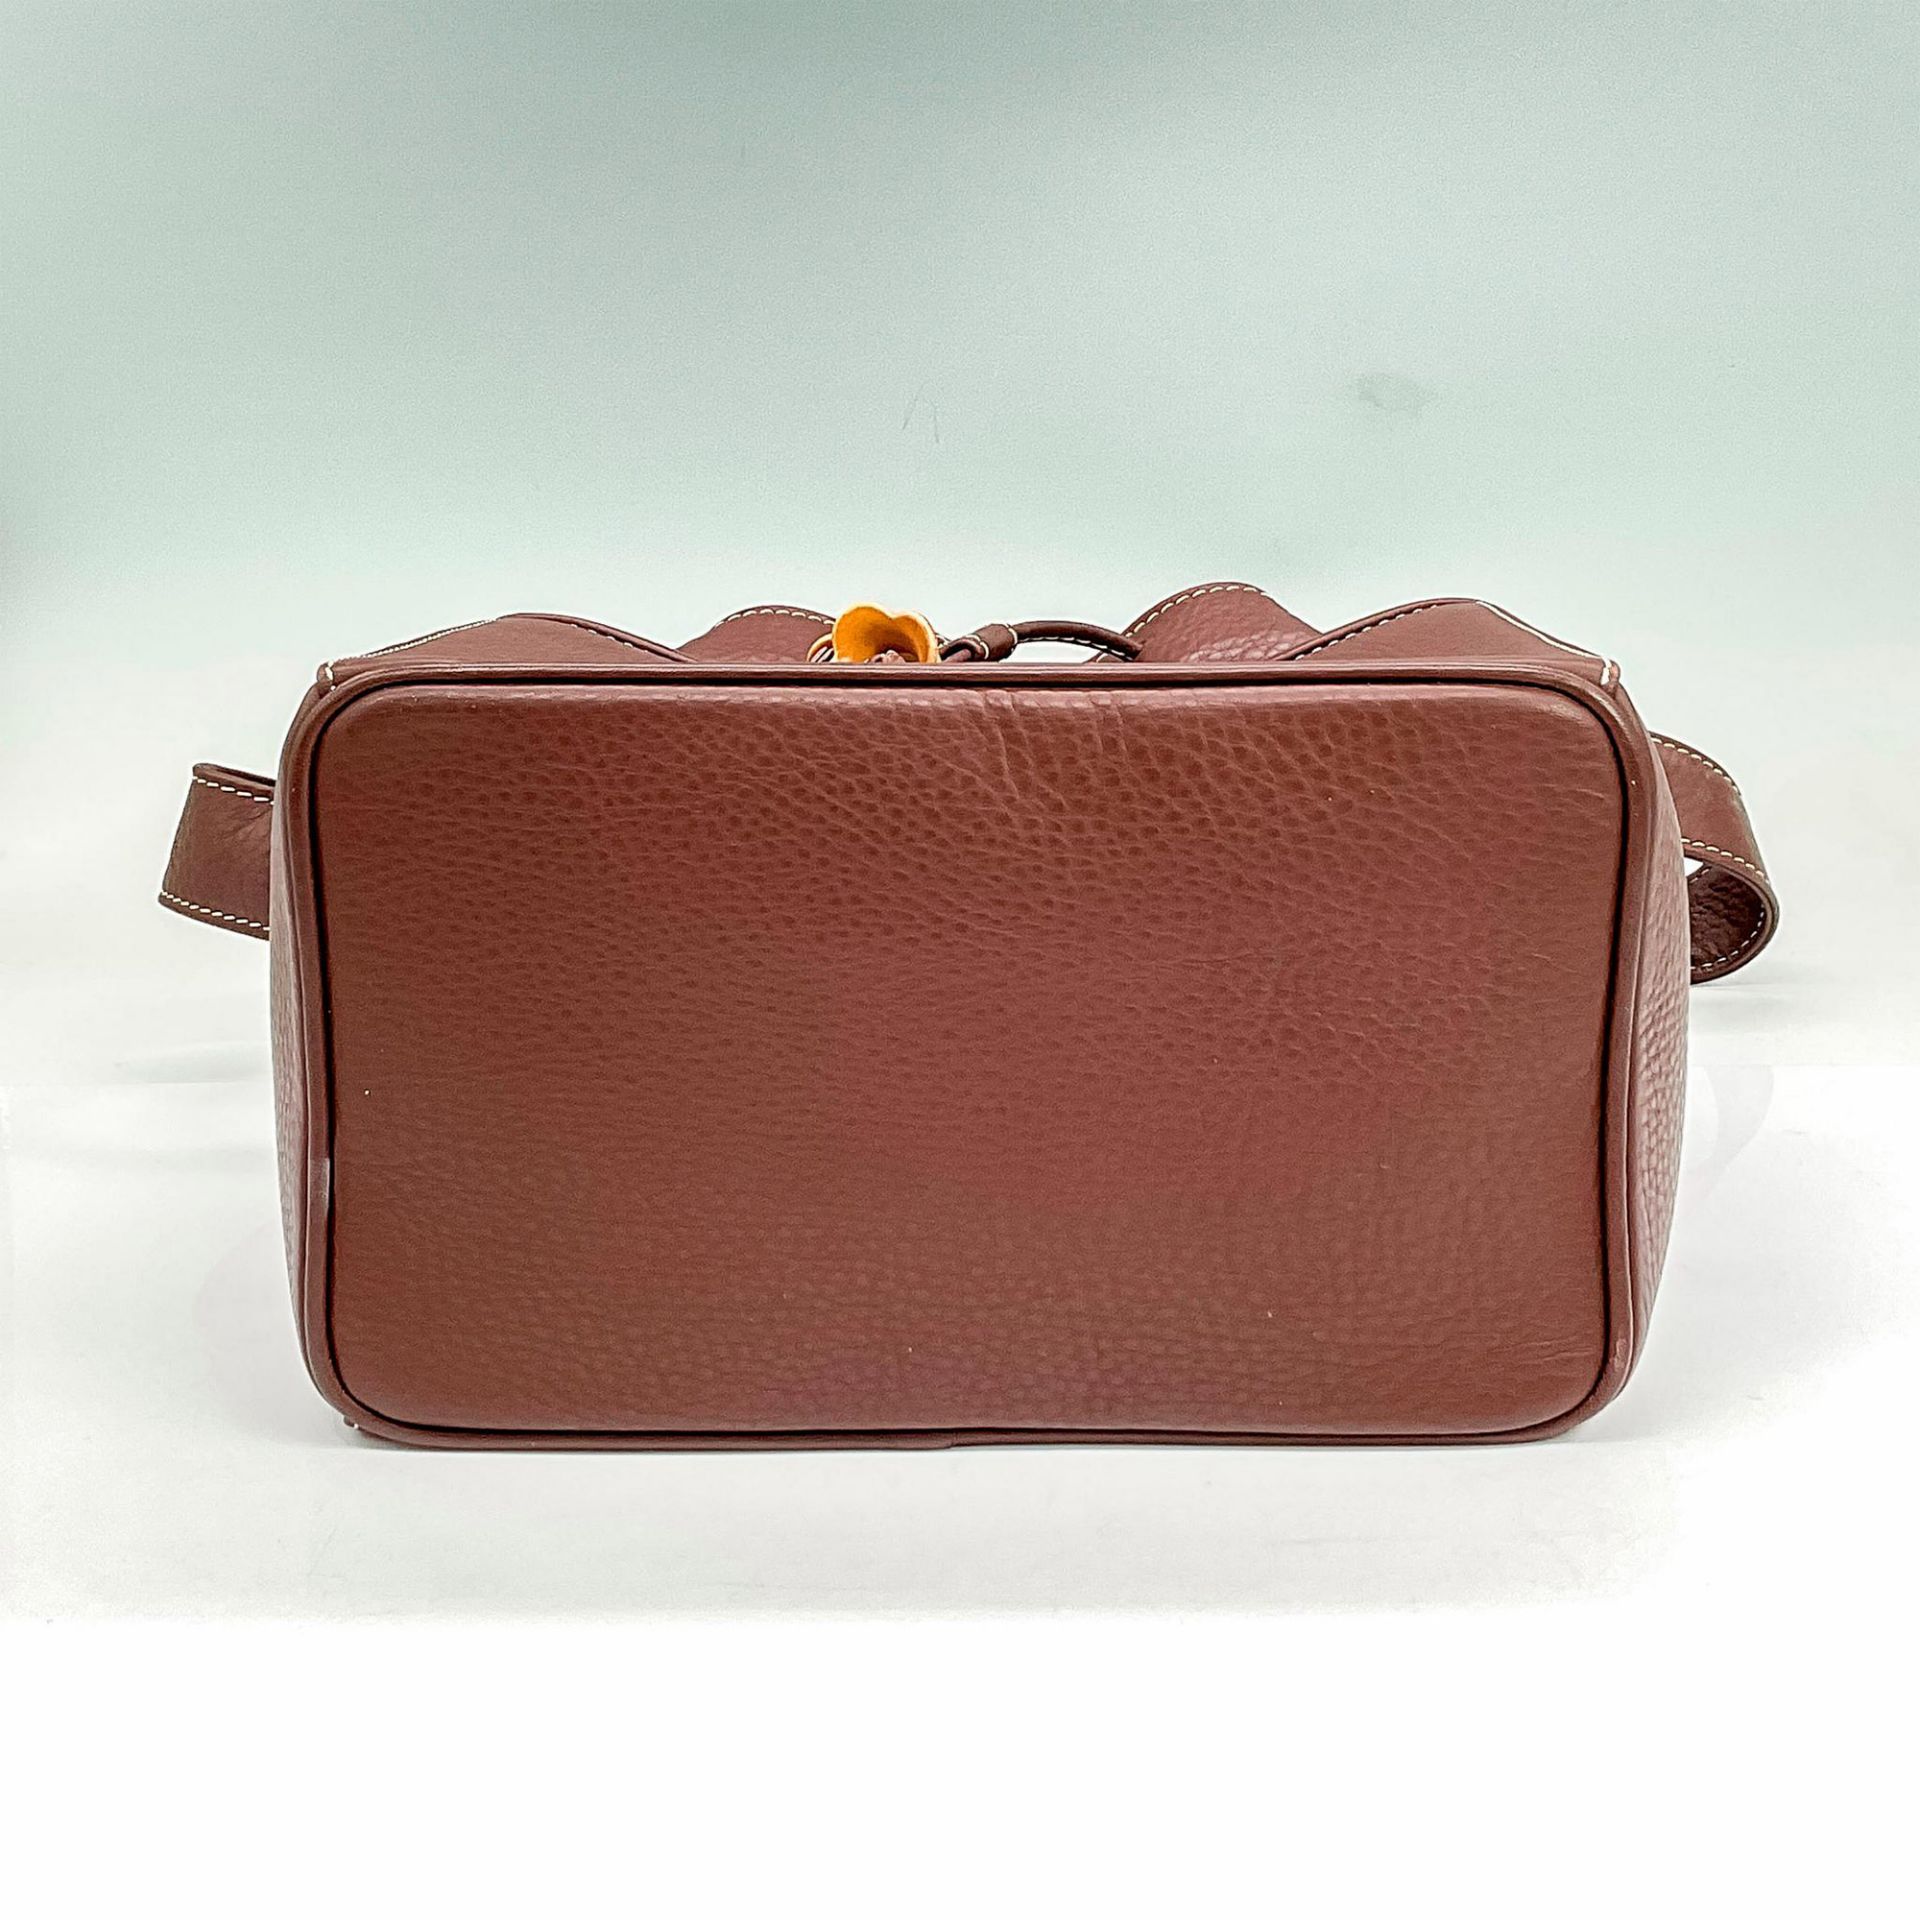 Lladro Brown Leather Handbag With Porcelain Accents - Image 6 of 6